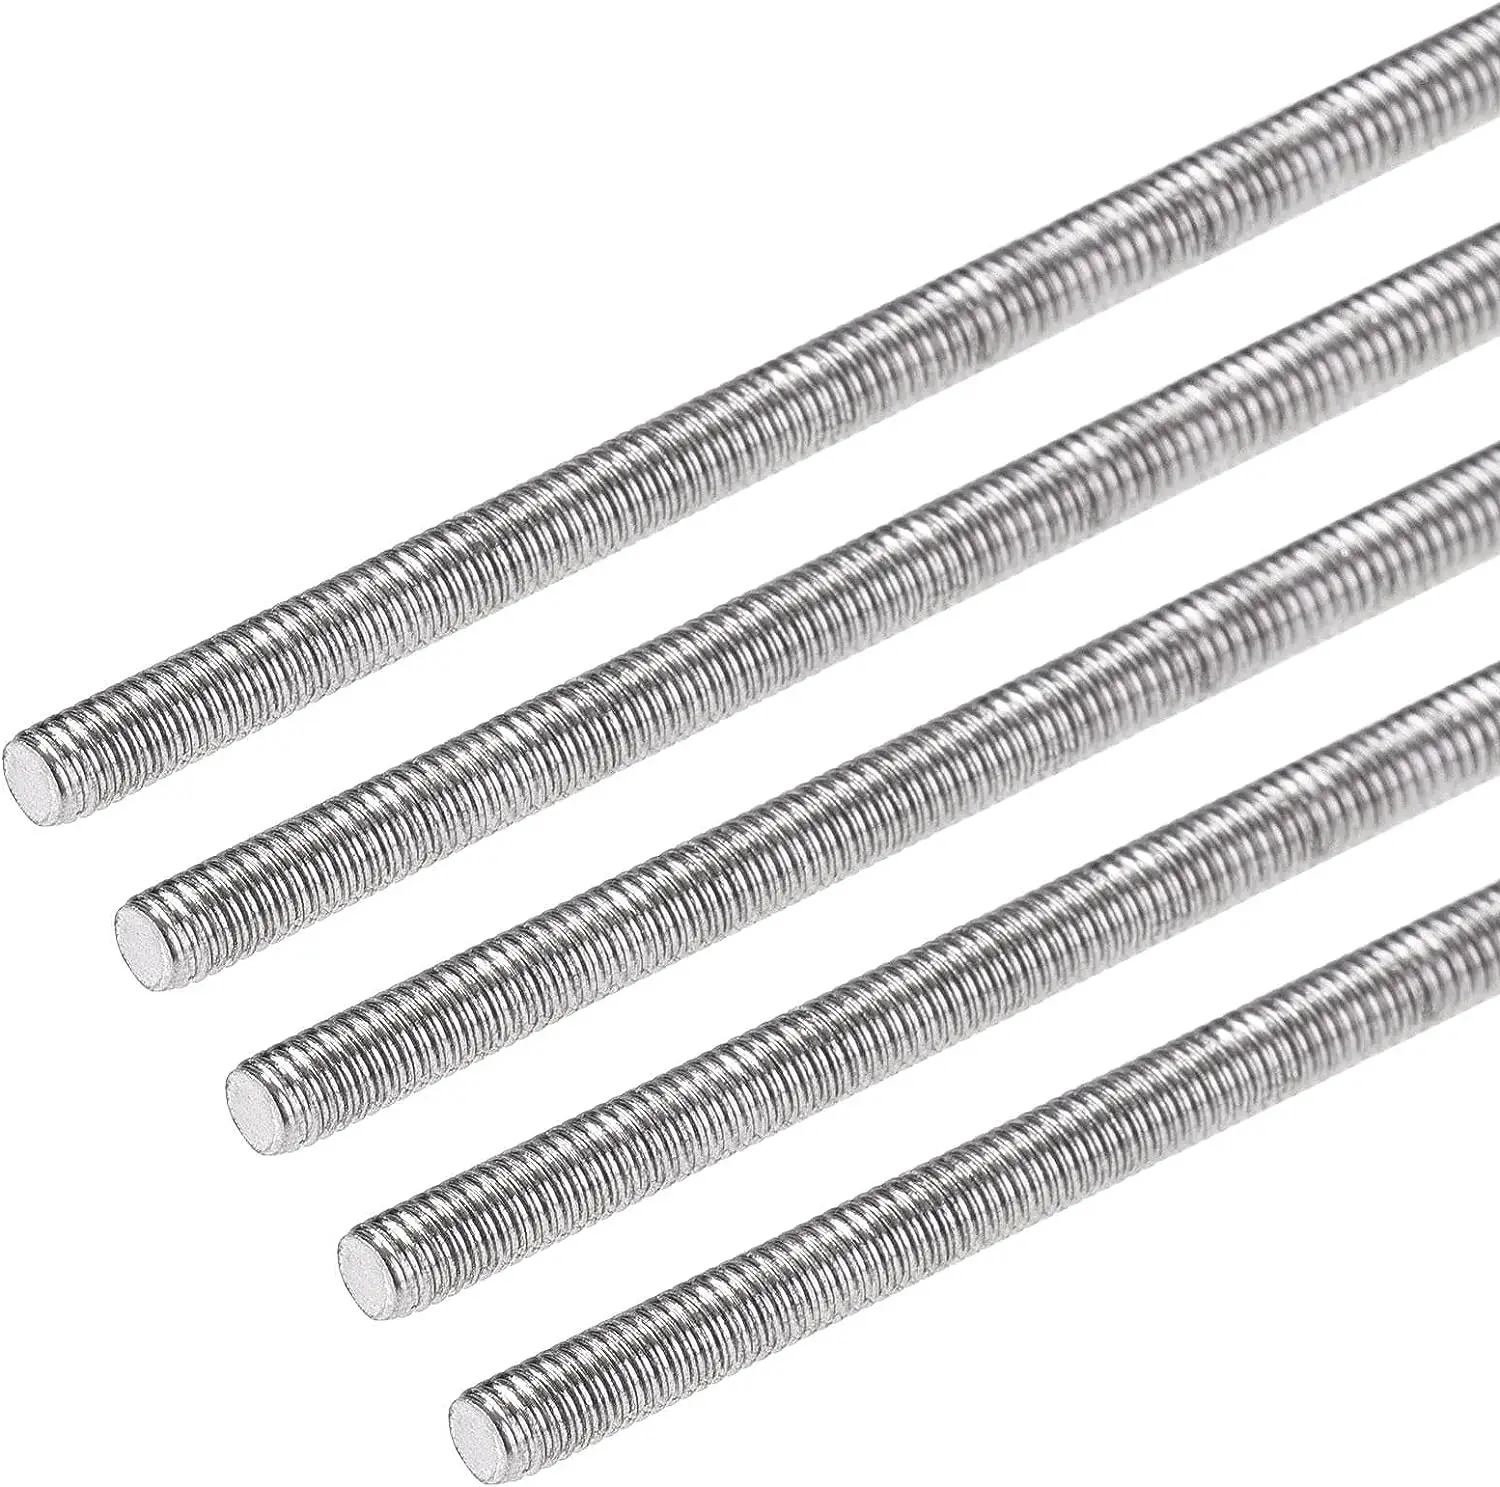 

5Pcs M3 x 100mm Fully Threaded Rod 304 Stainless Steel Right Hand Long Screws Threads Used for Screw into Hangers and U-Bolts